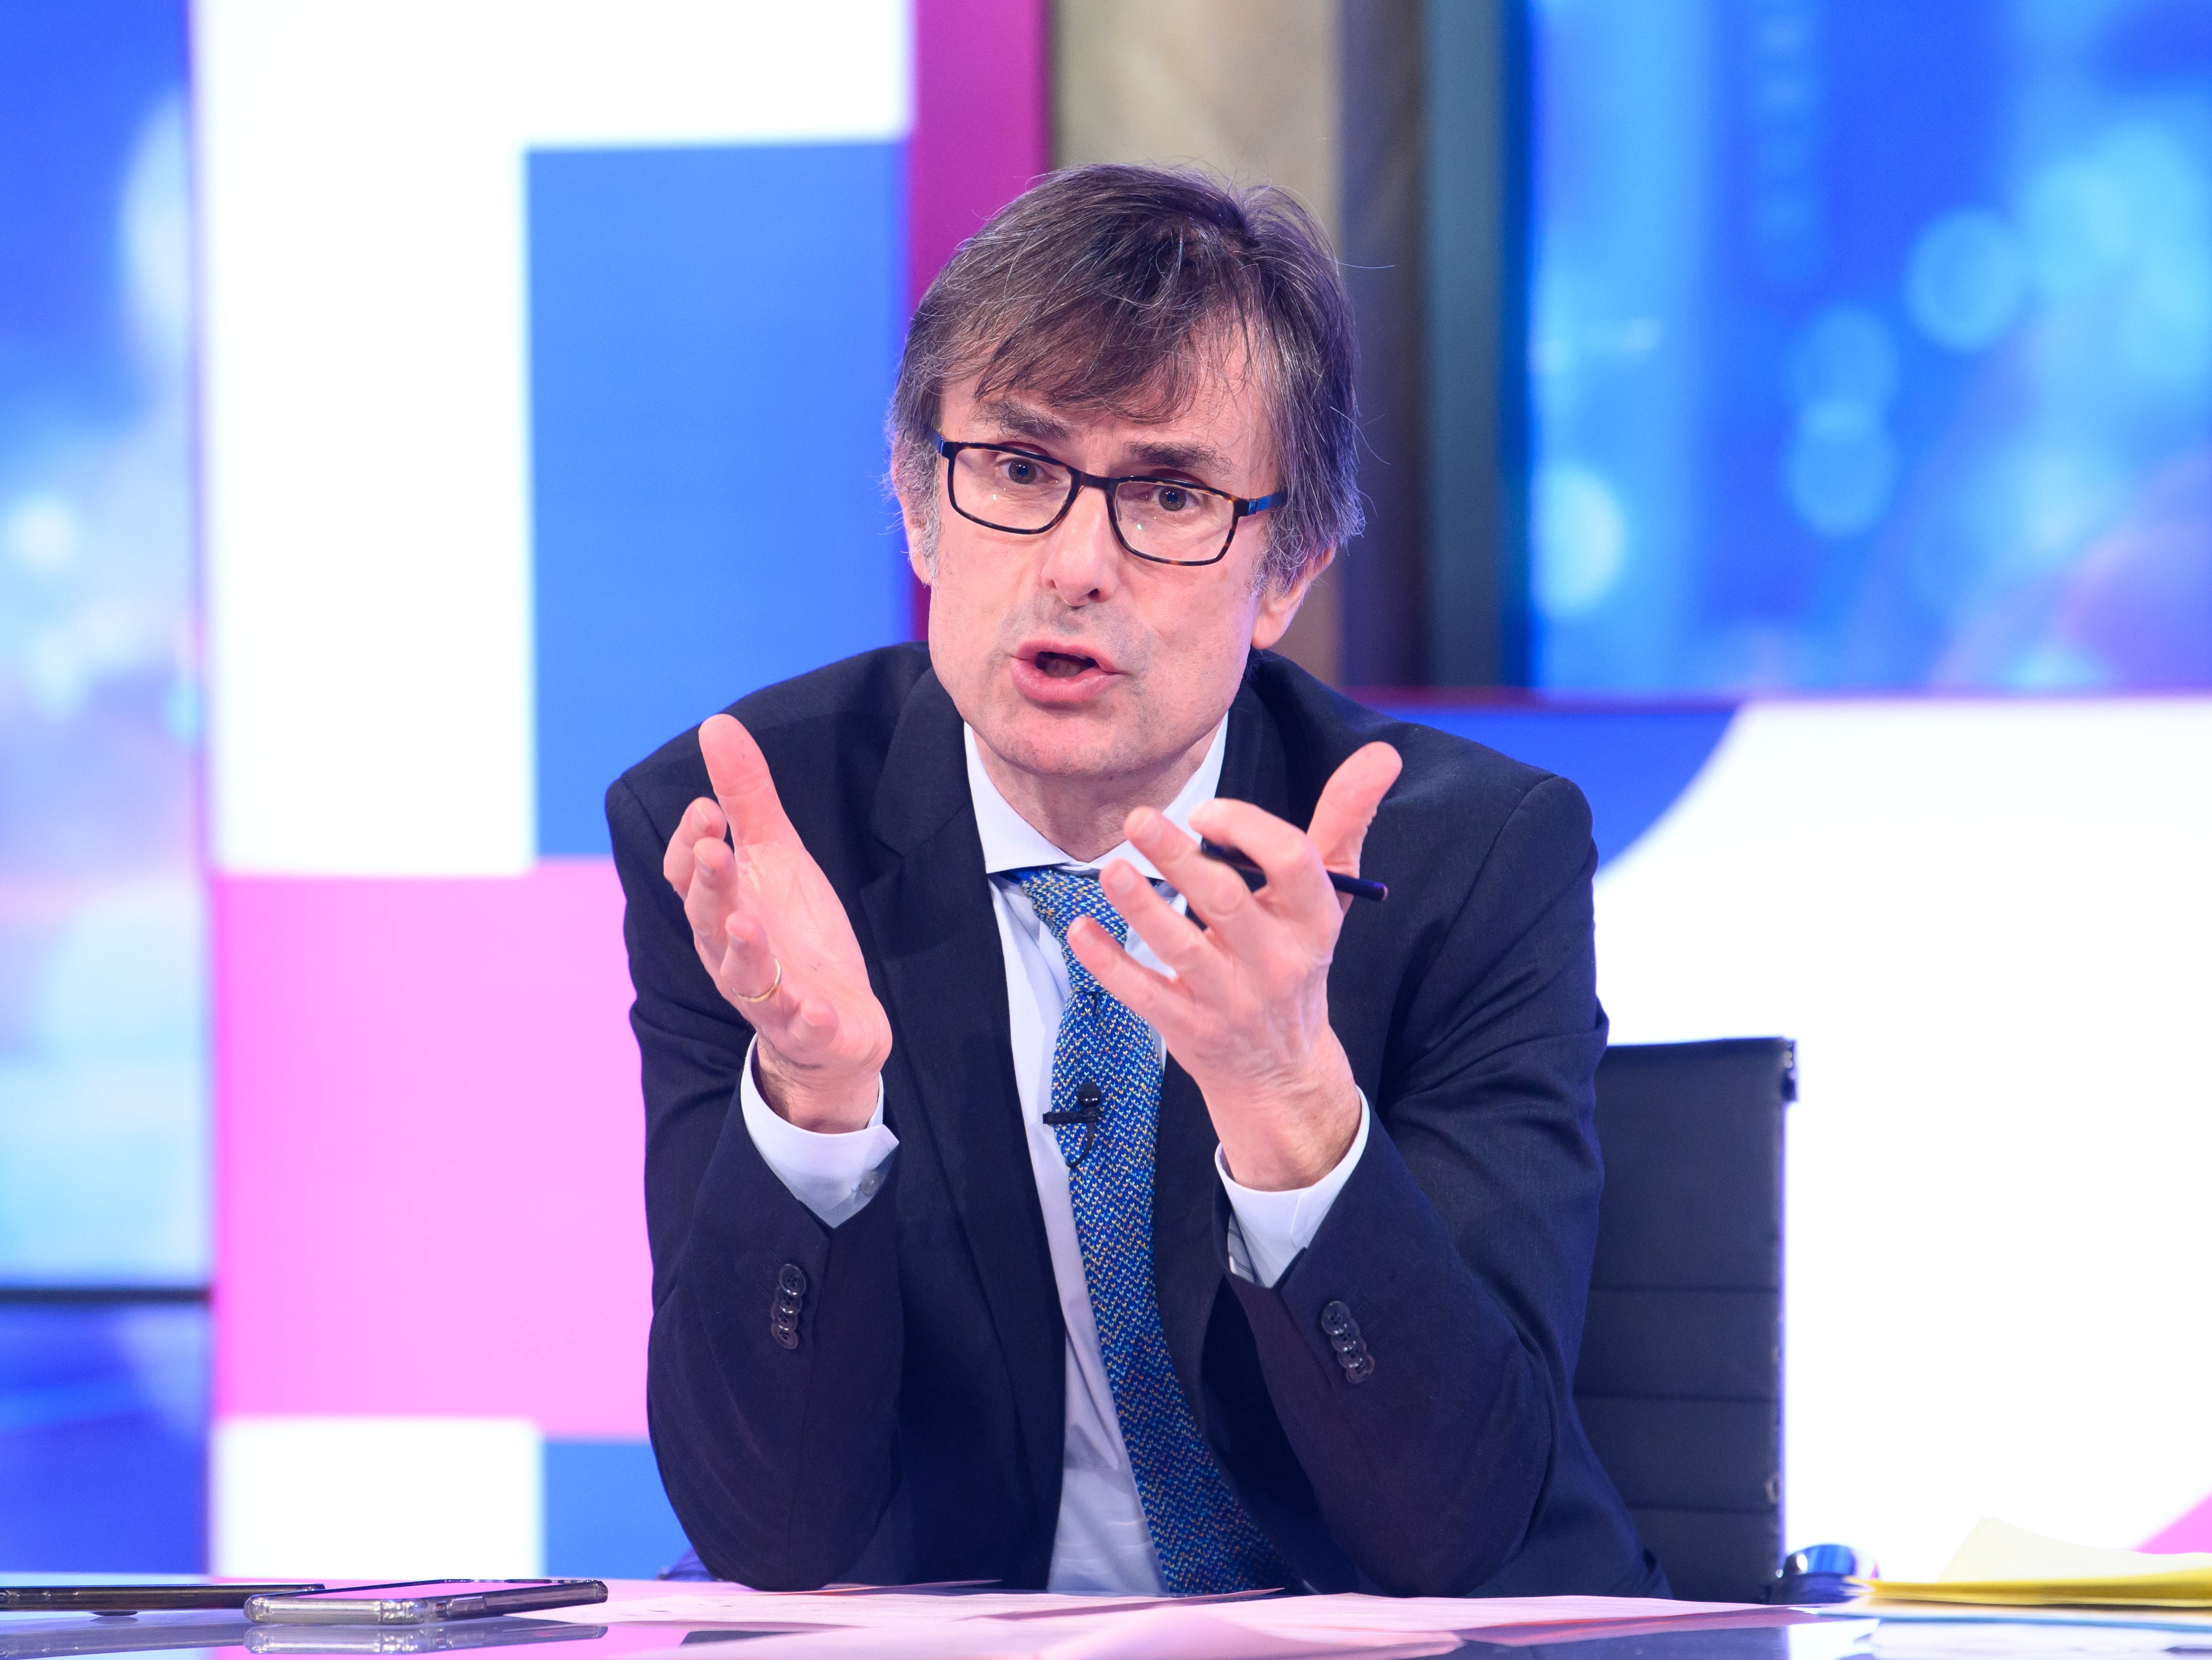 ITV’s political editor confessed that he ‘loves singing’